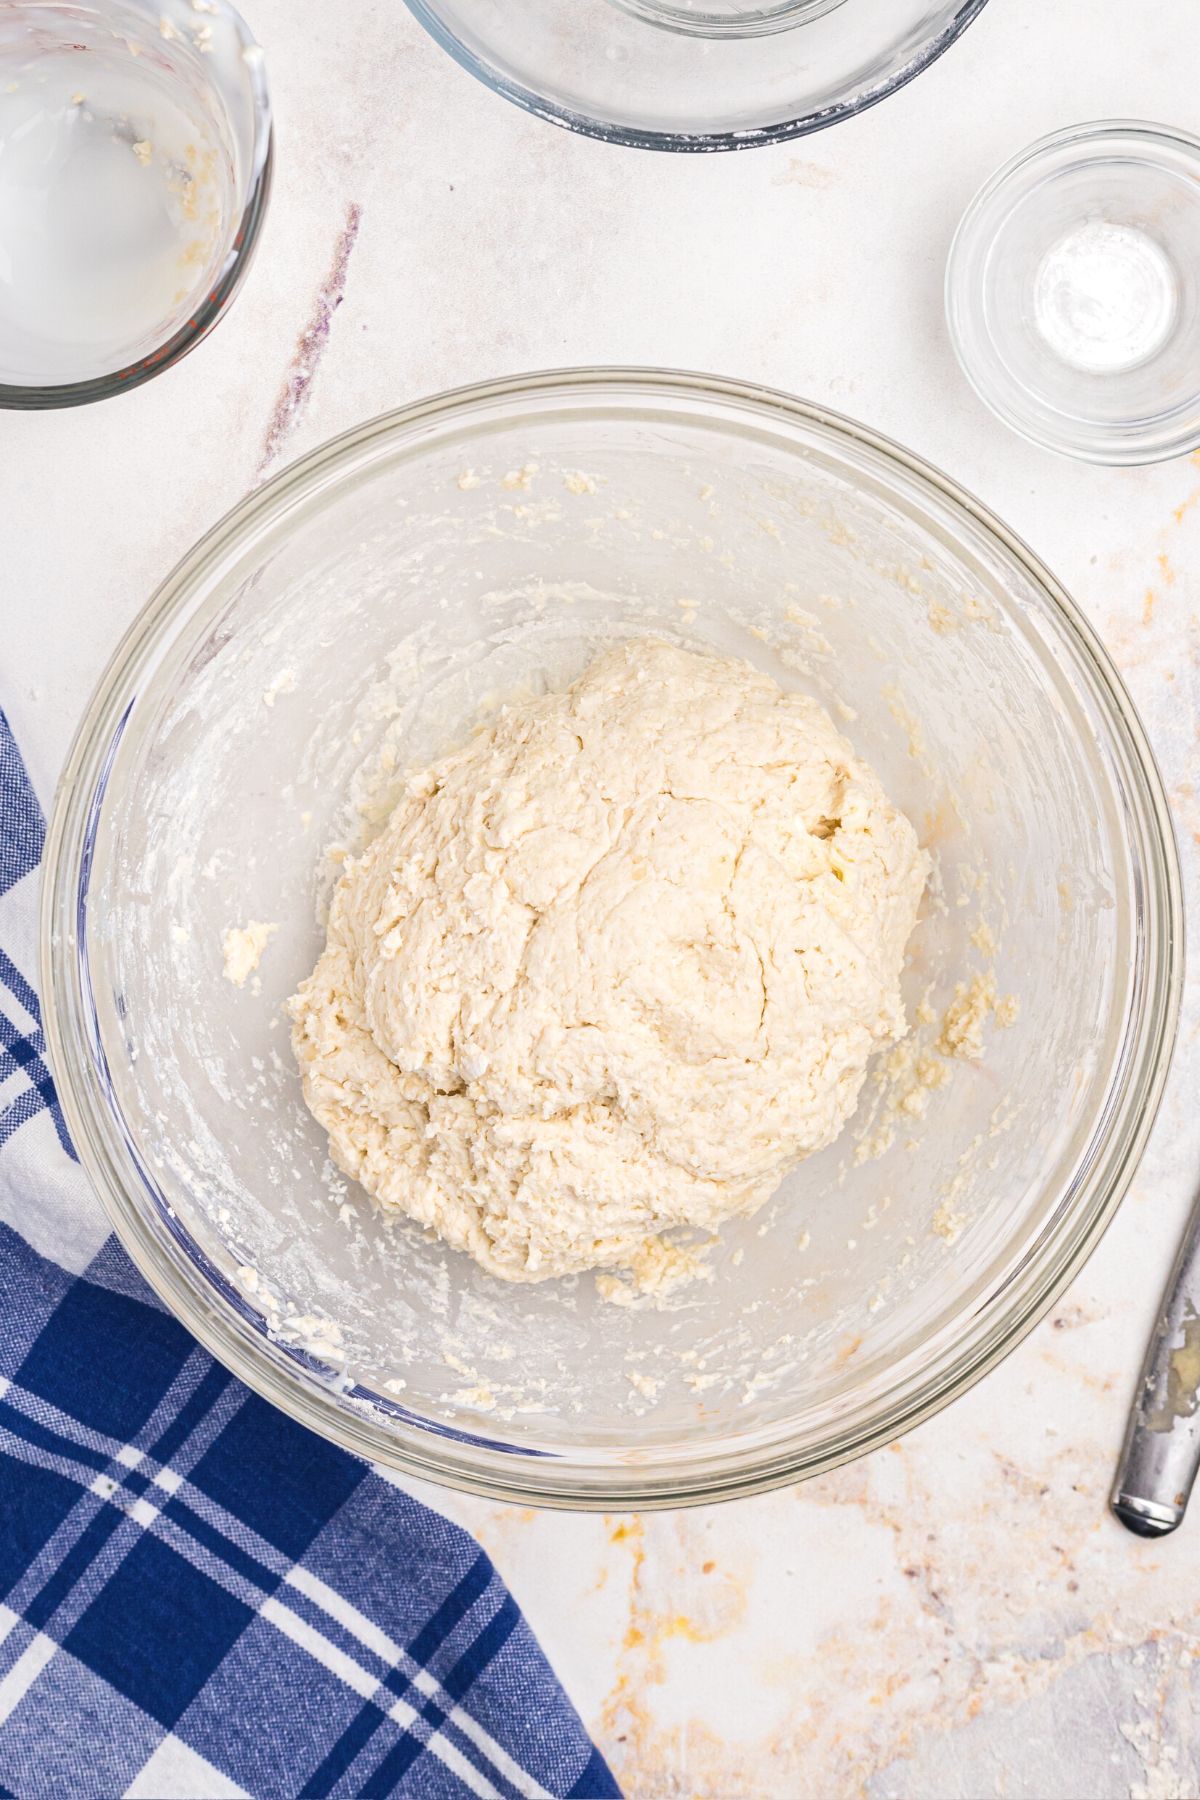 Dough ingredients mixed in a clear glass bowl until a soft ball of dough forms.